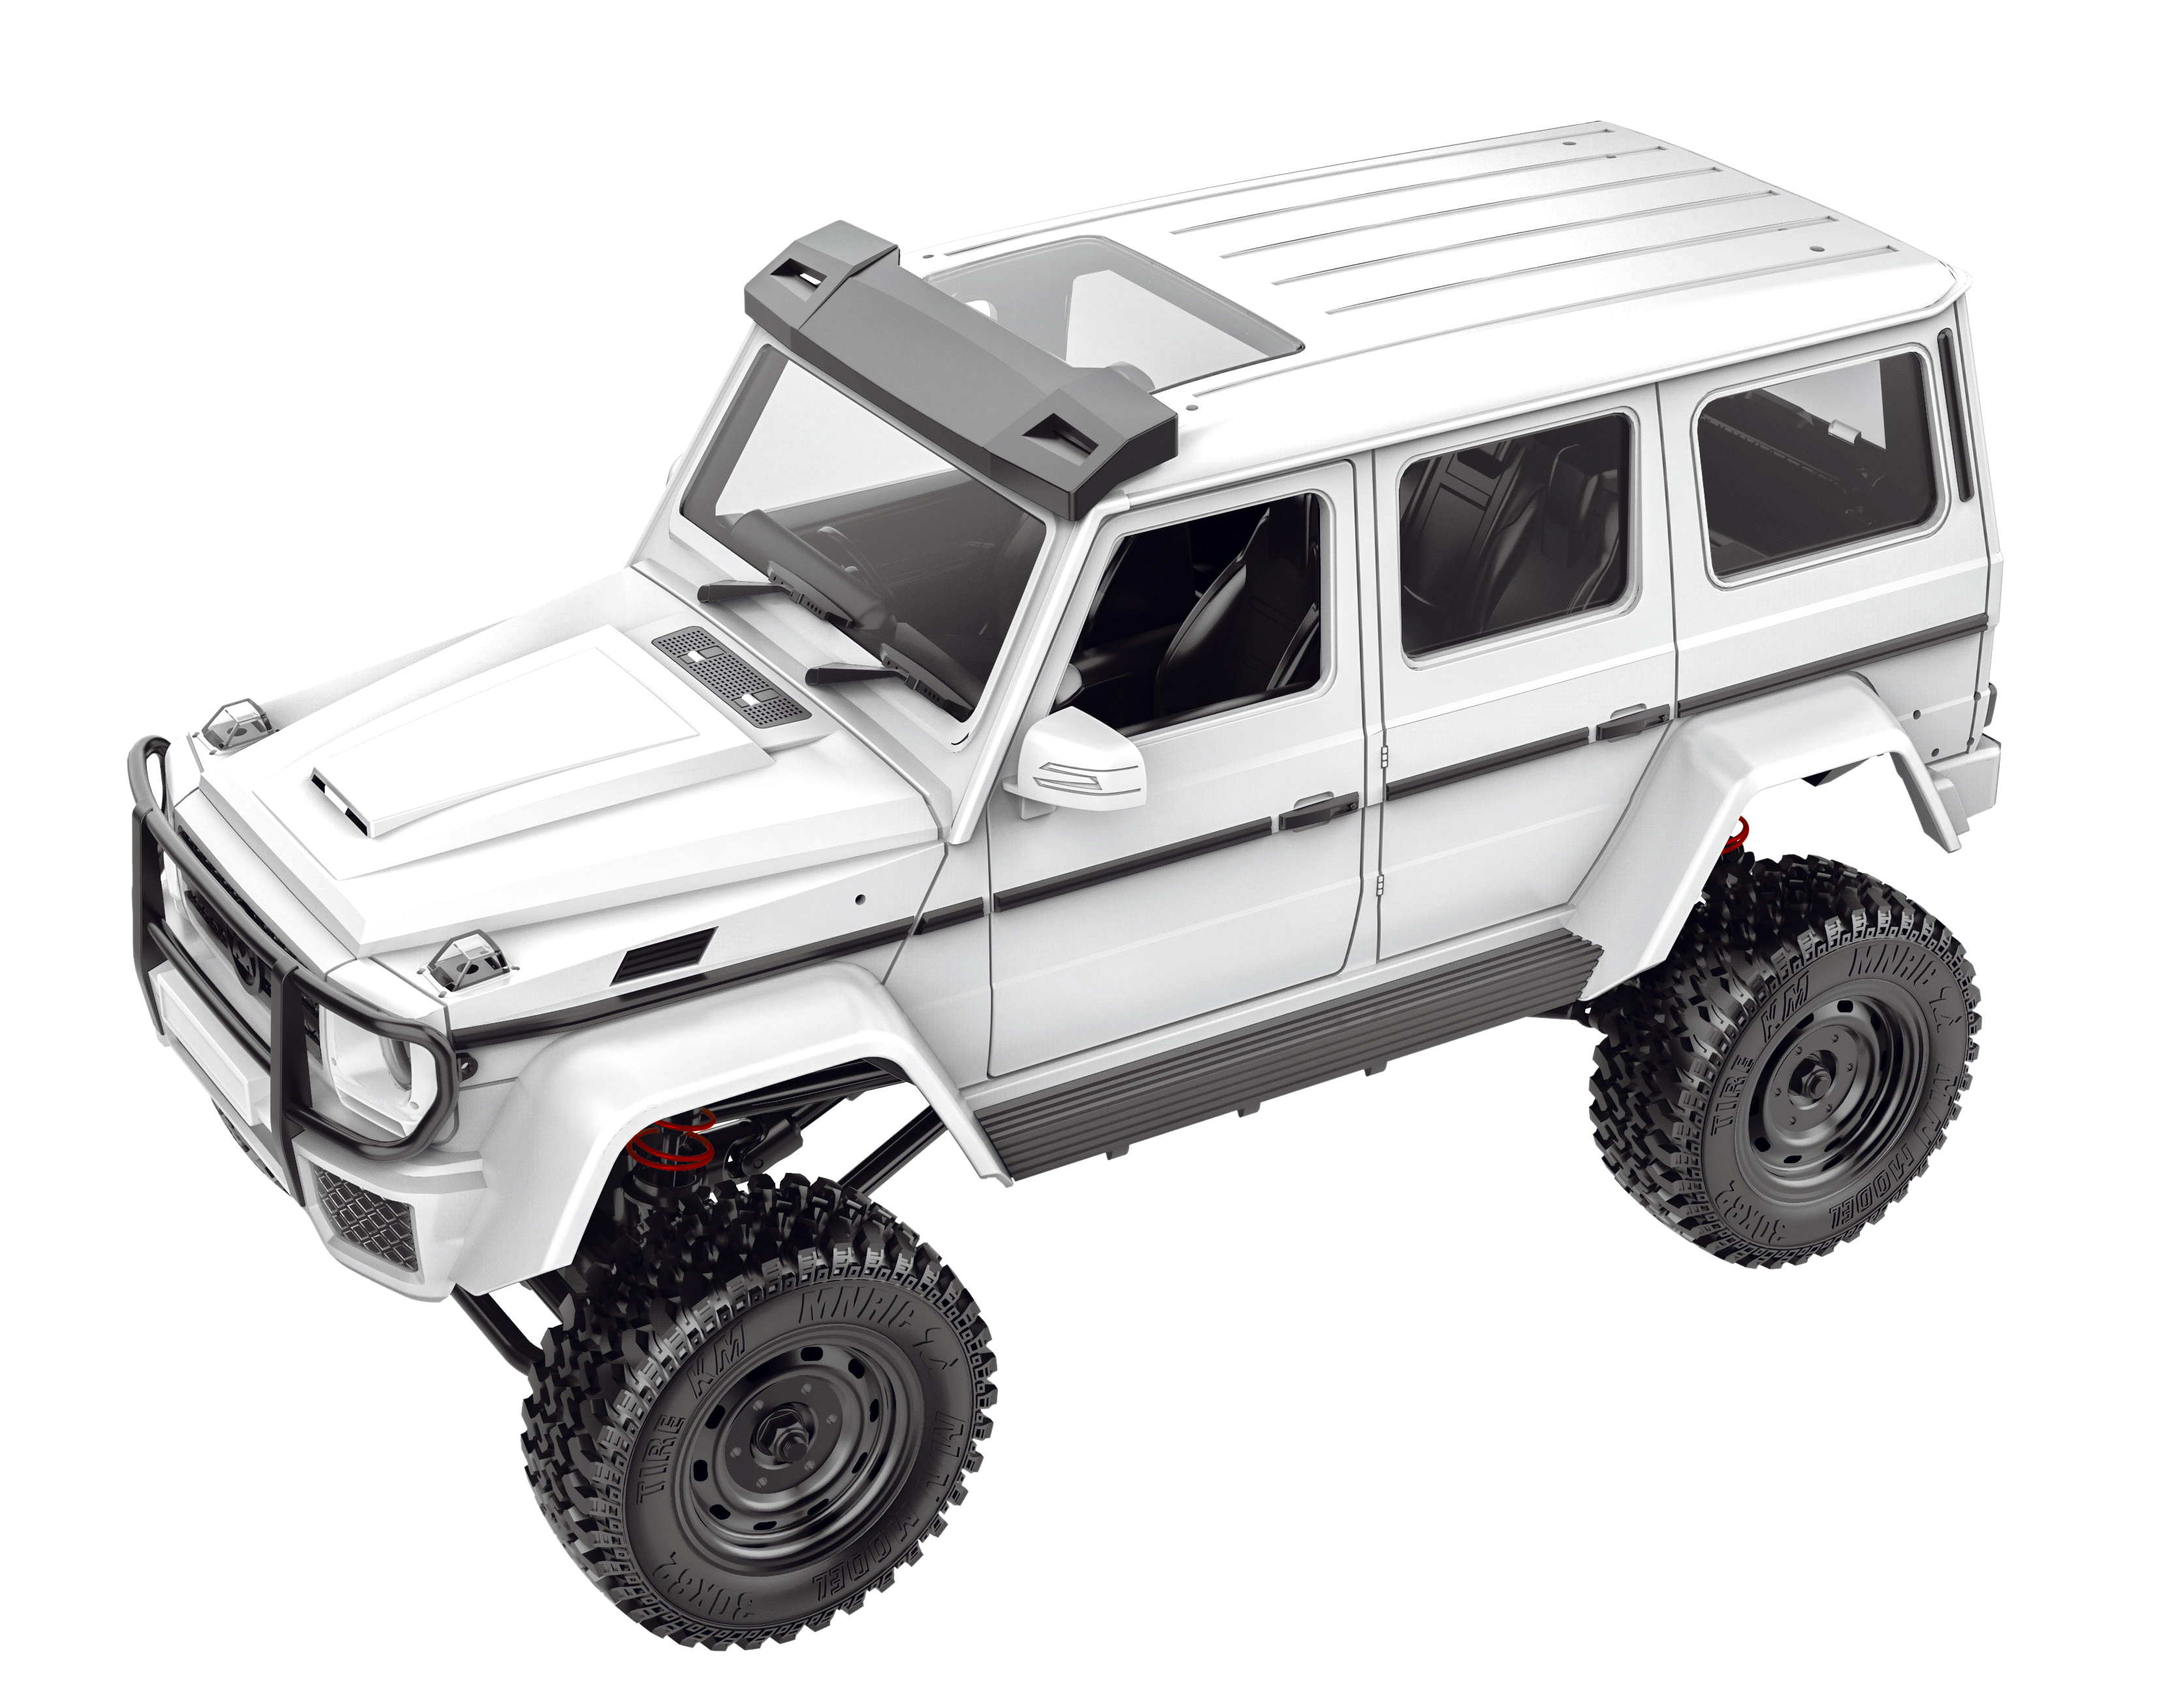 Mn86k 1/12 2.4g Four-wheel Drive Climbing Off-road Vehicle Toy G500 Assembly  Version White